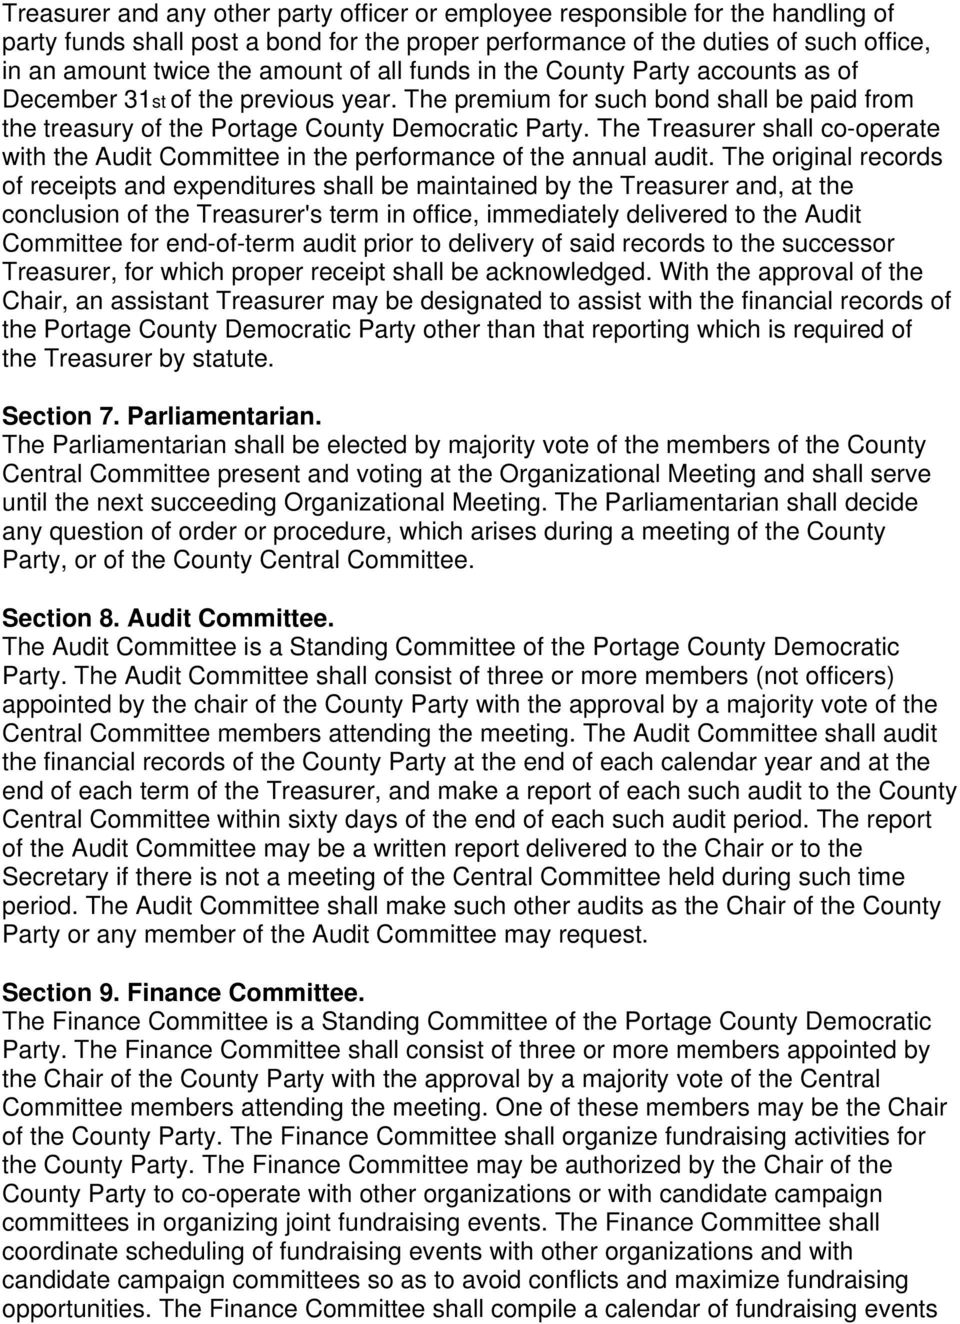 The Treasurer shall co-operate with the Audit Committee in the performance of the annual audit.